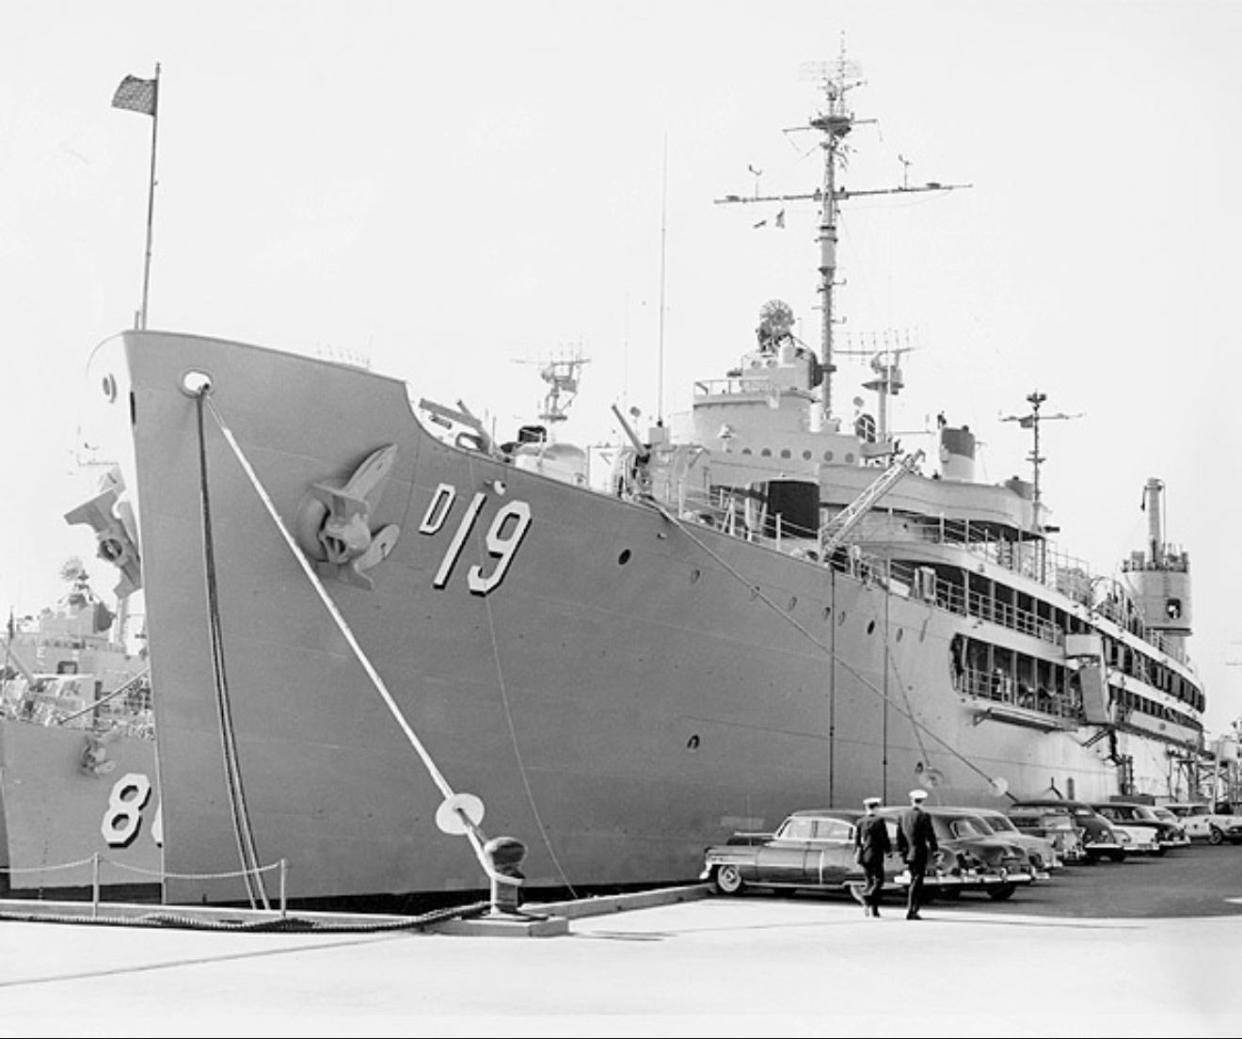 USS Yosemite (AD-19) moored in her homeport berth at Pier One, Naval Station Newport, in the mid-1960s. The ship was based in Melville or Newport from 1946 to 1969.